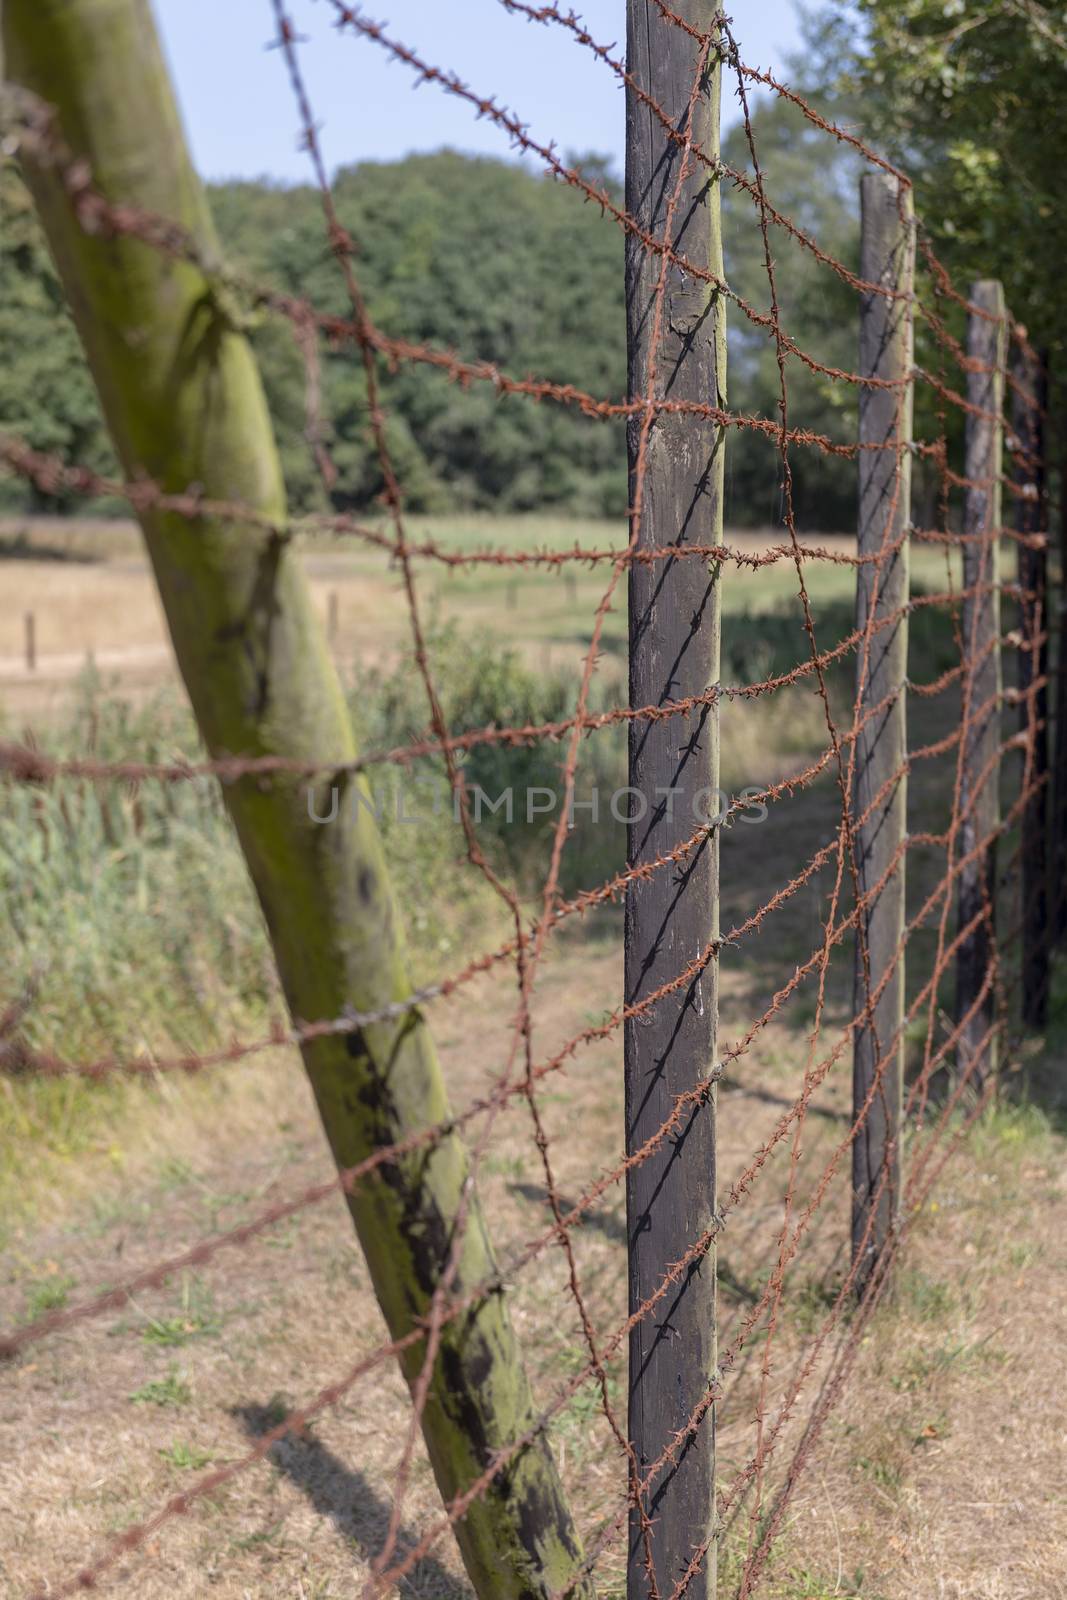 High fence with barbed wire
 by Tofotografie